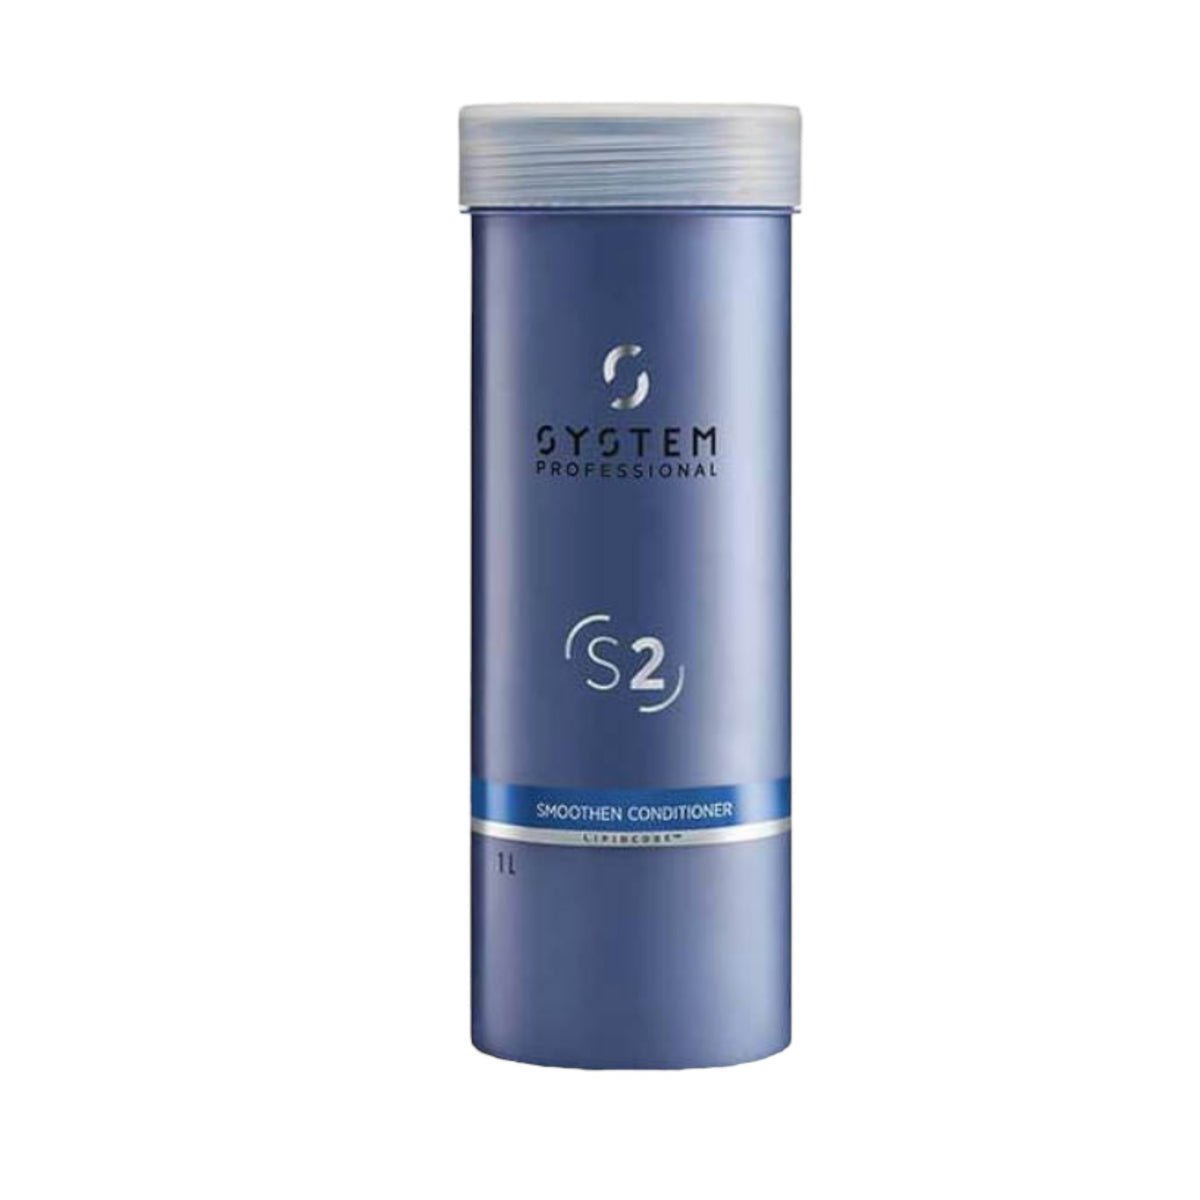 System Professional Forma Smoothen Conditioner (S2) 1000ml